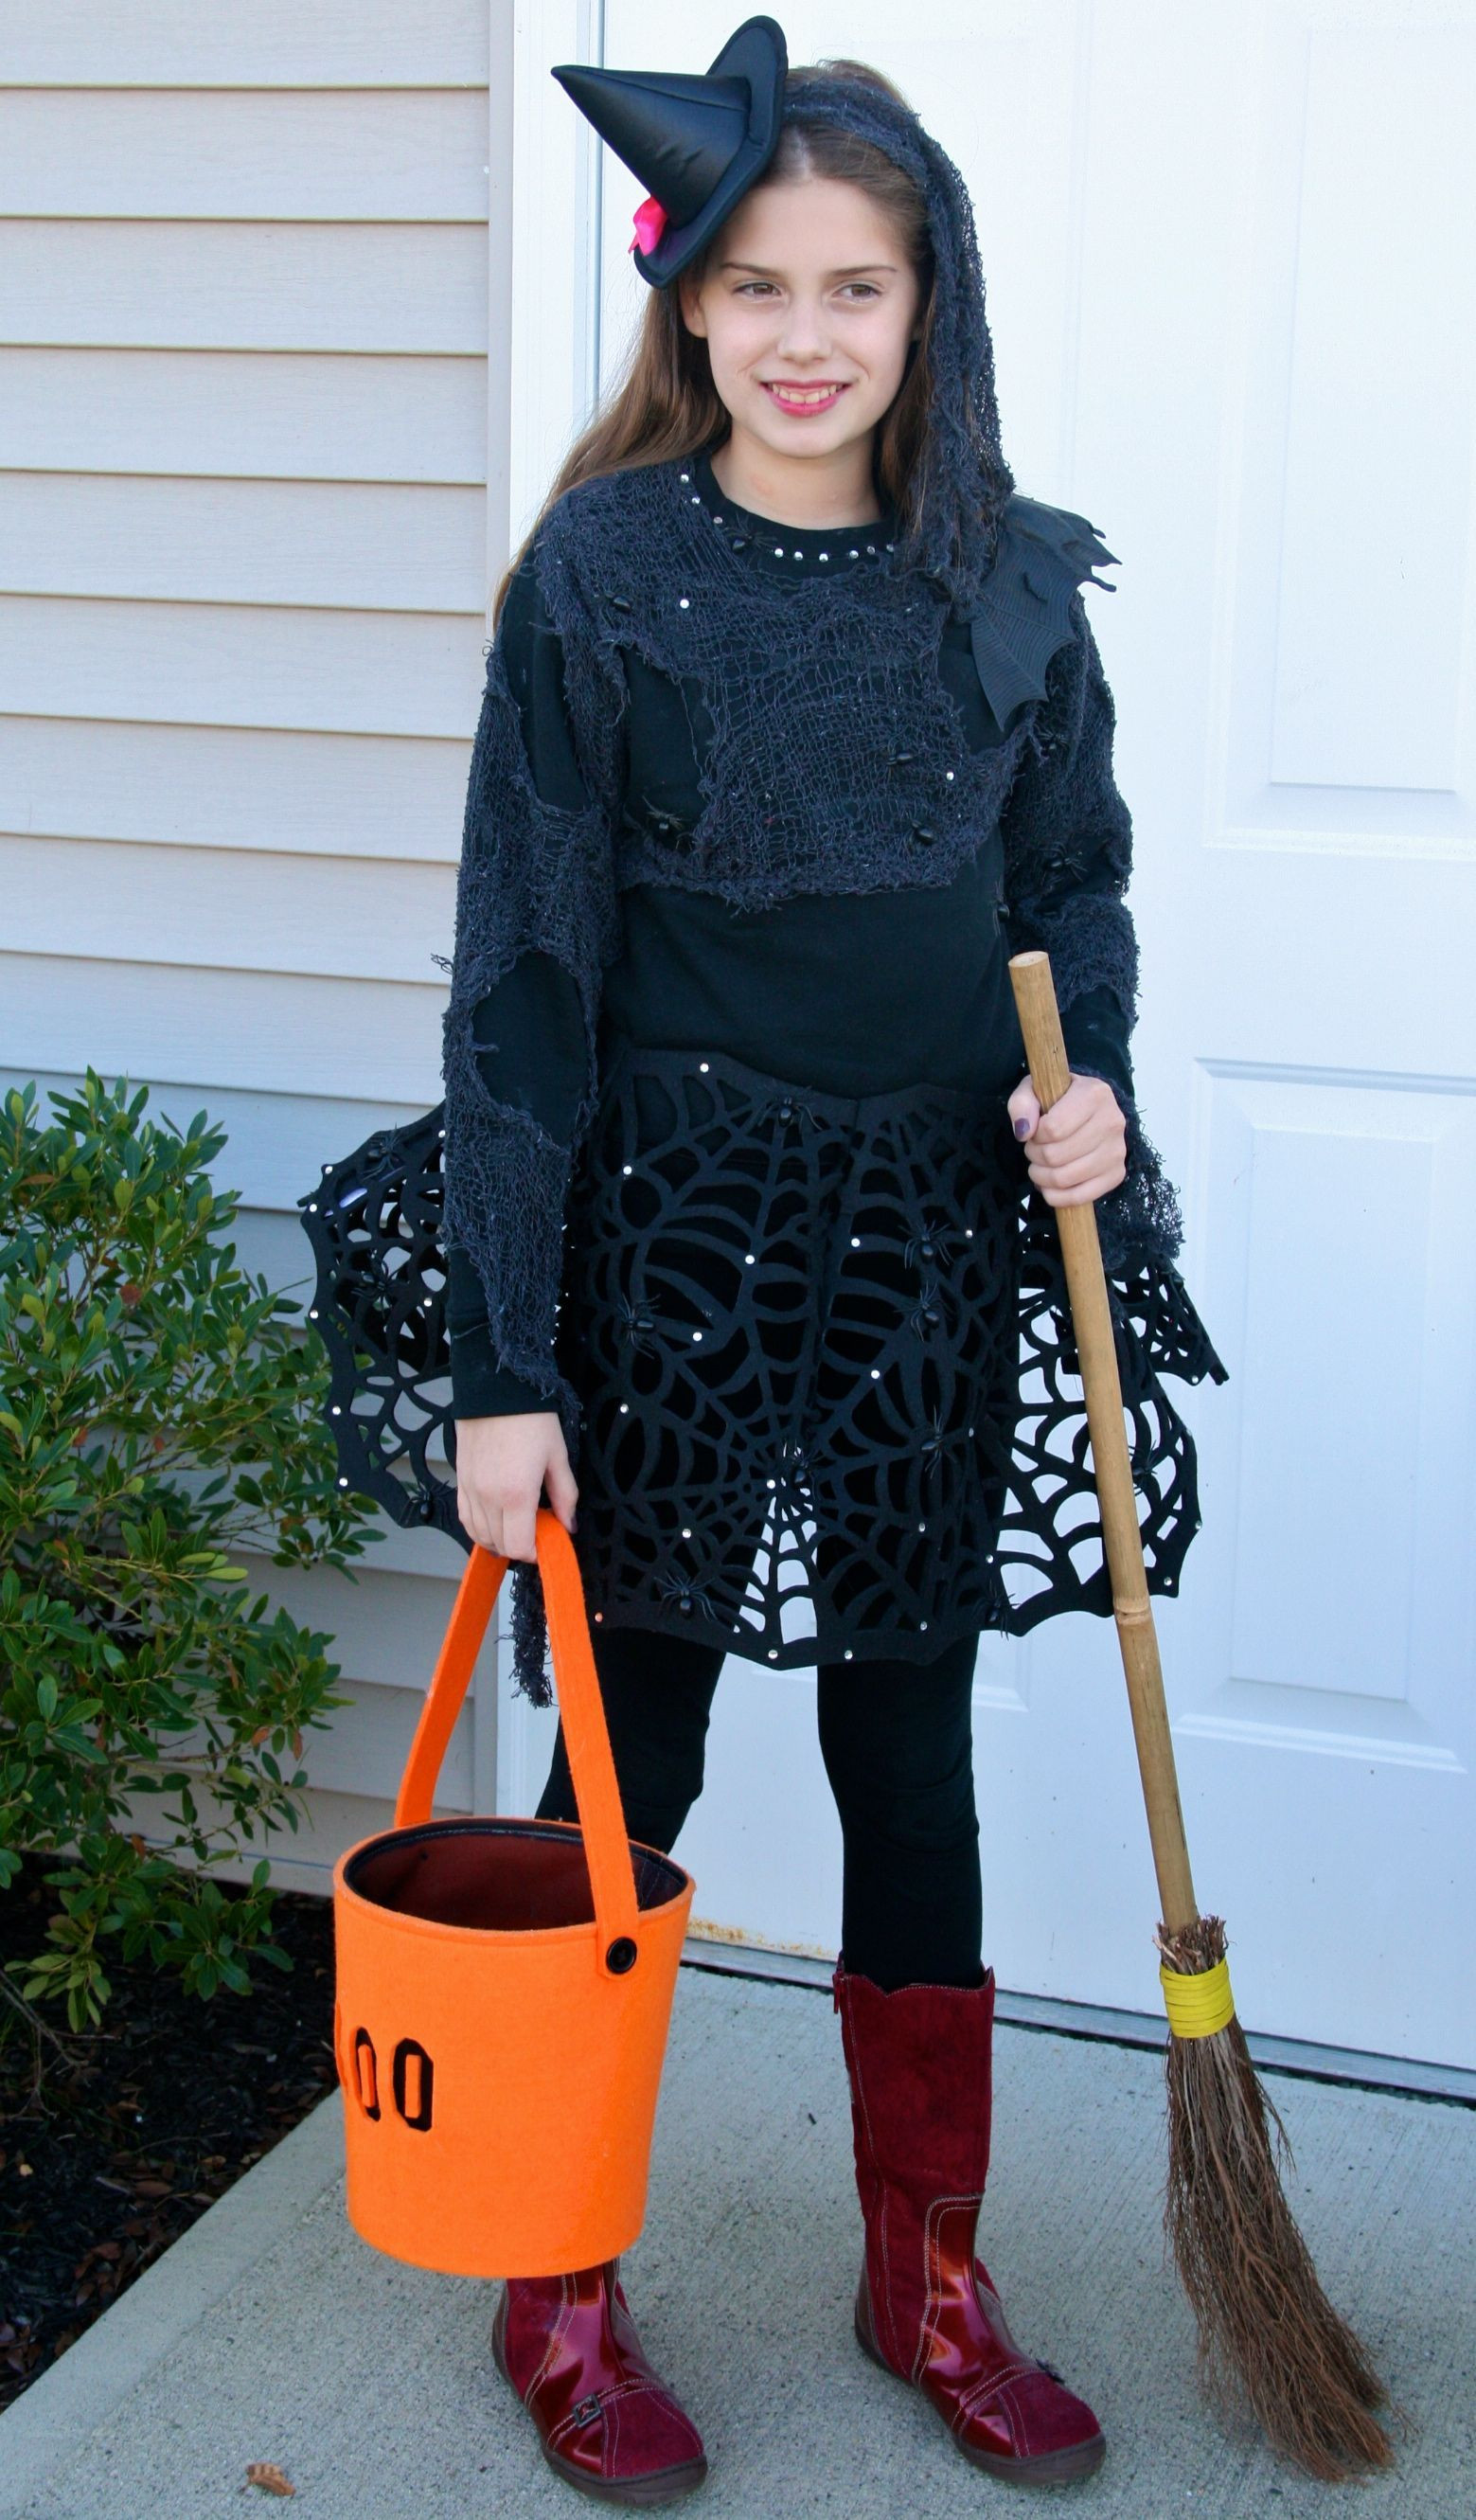 DIY Witch Costume
 Instructions to DIY witch Halloween costume I like the